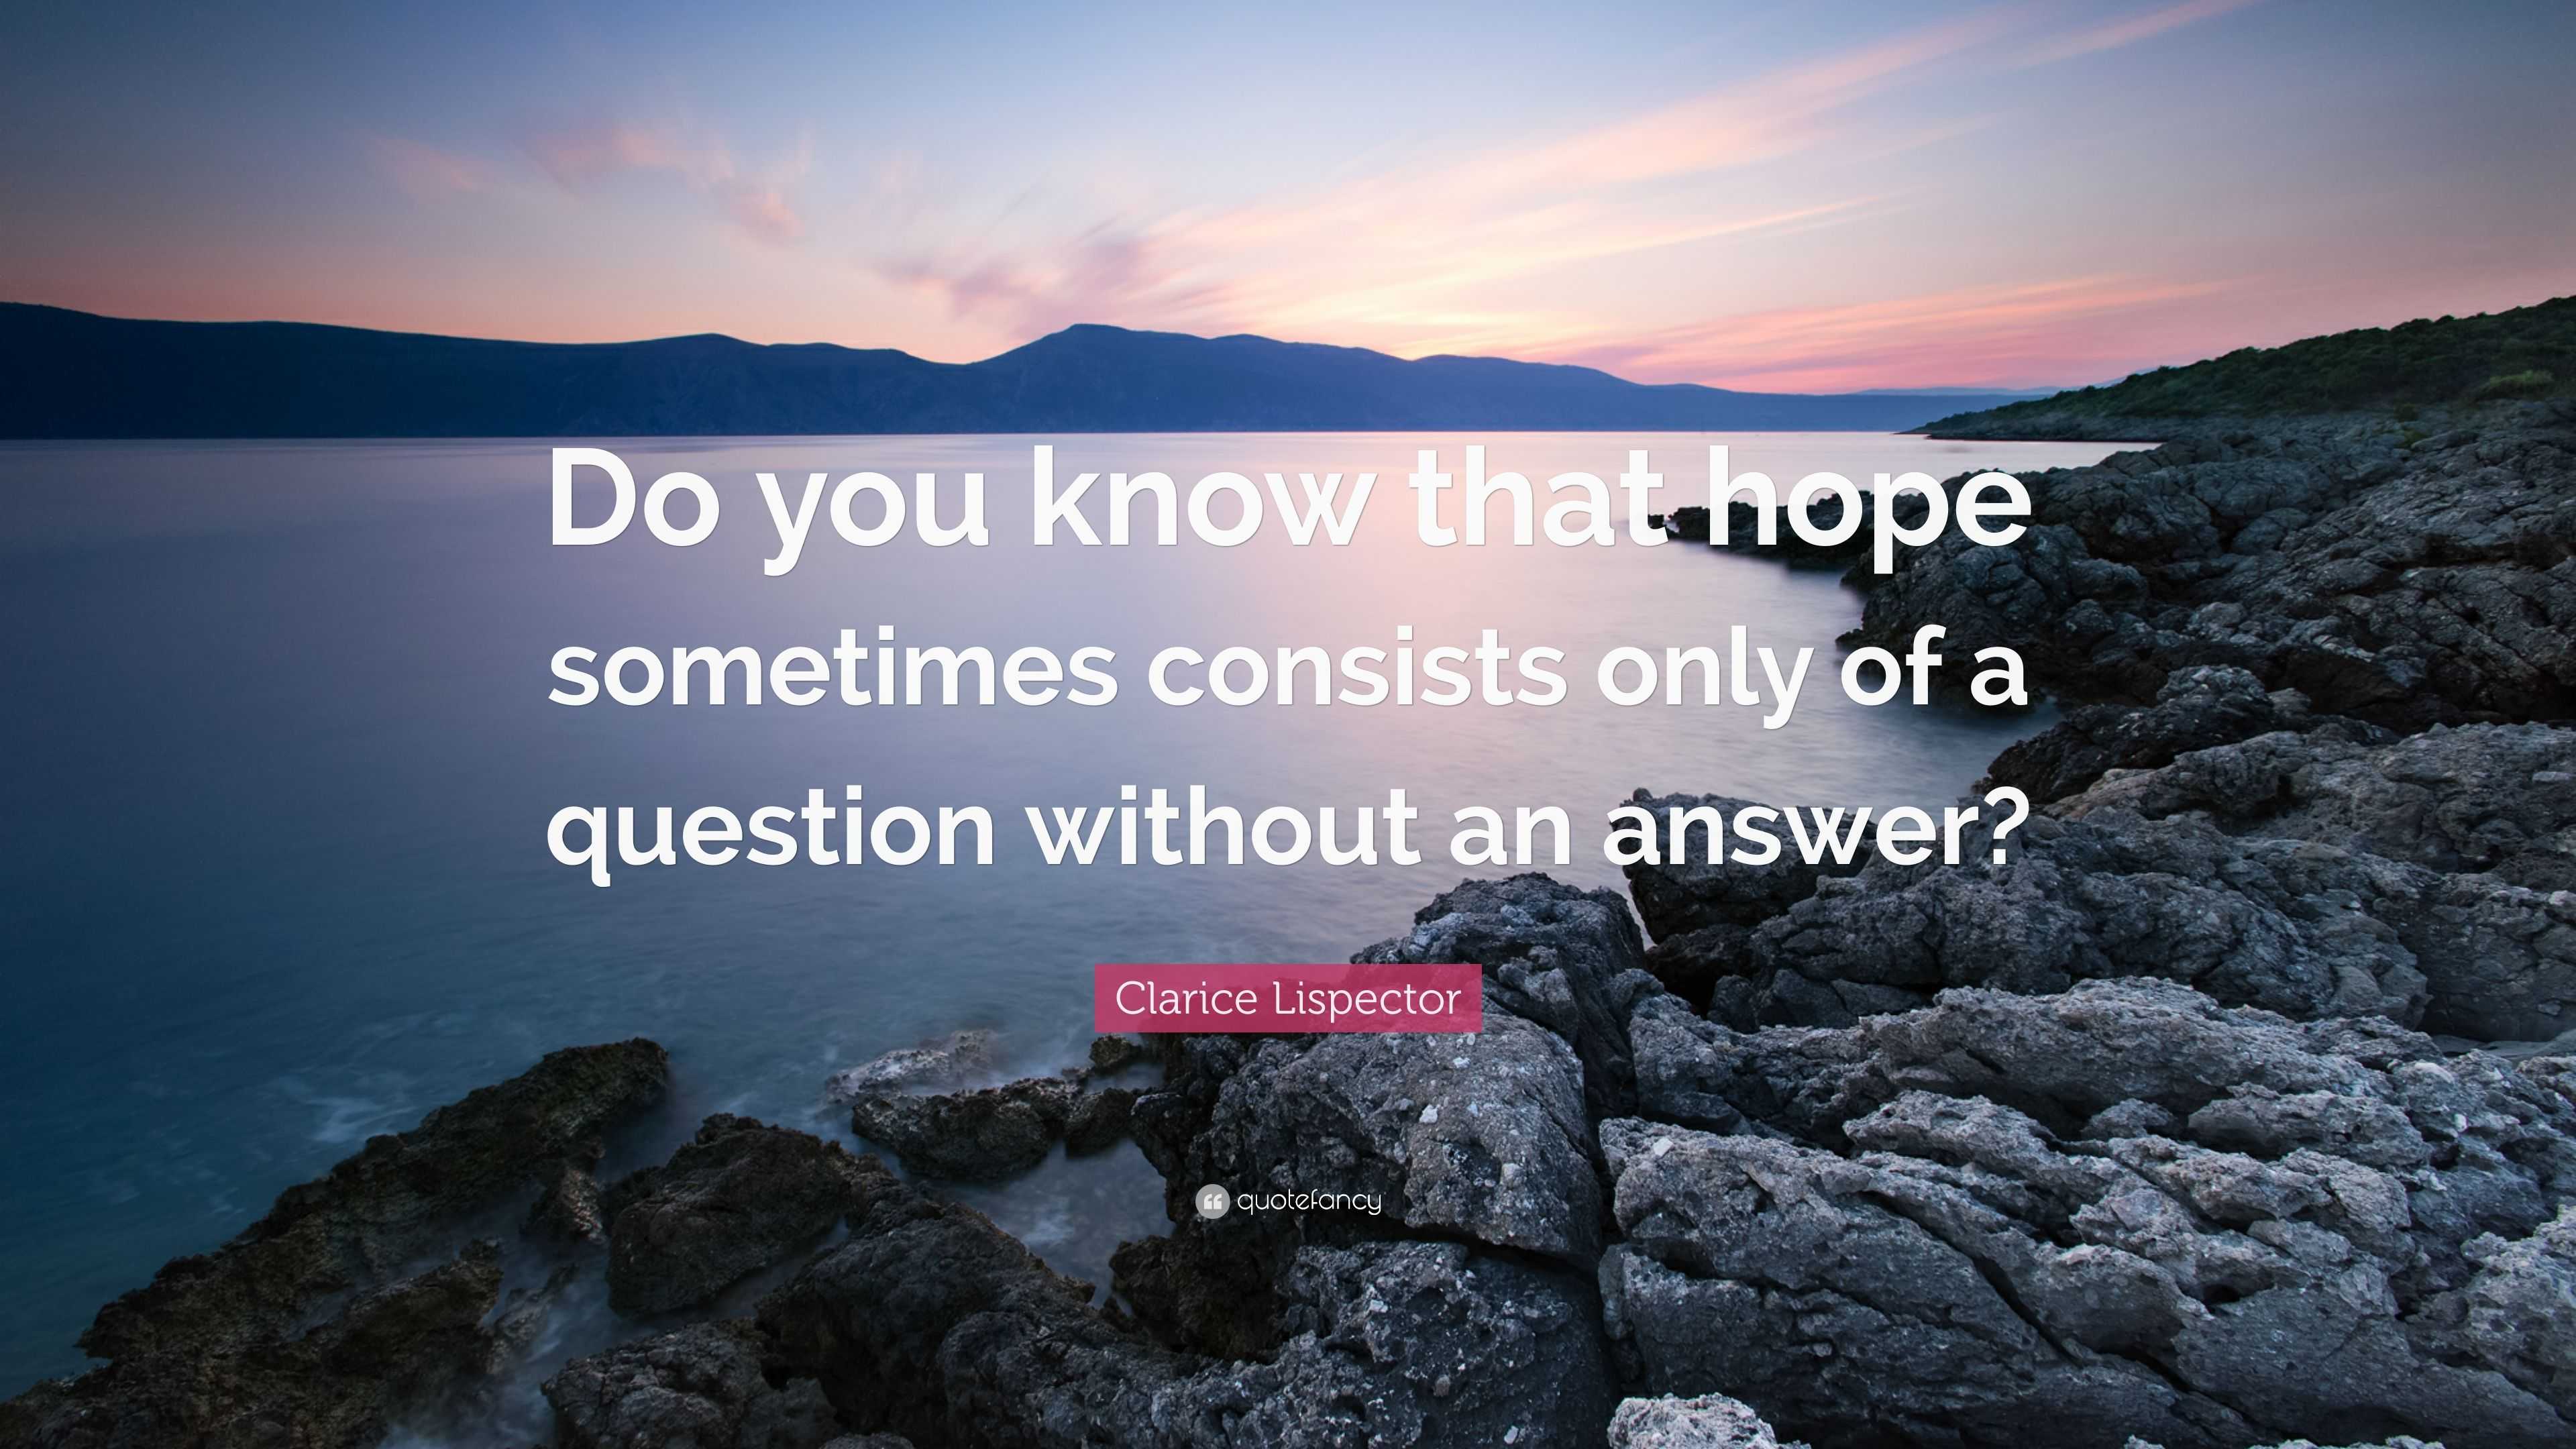 Clarice Lispector Quote: “Do you know that hope sometimes consists only of  a question without an